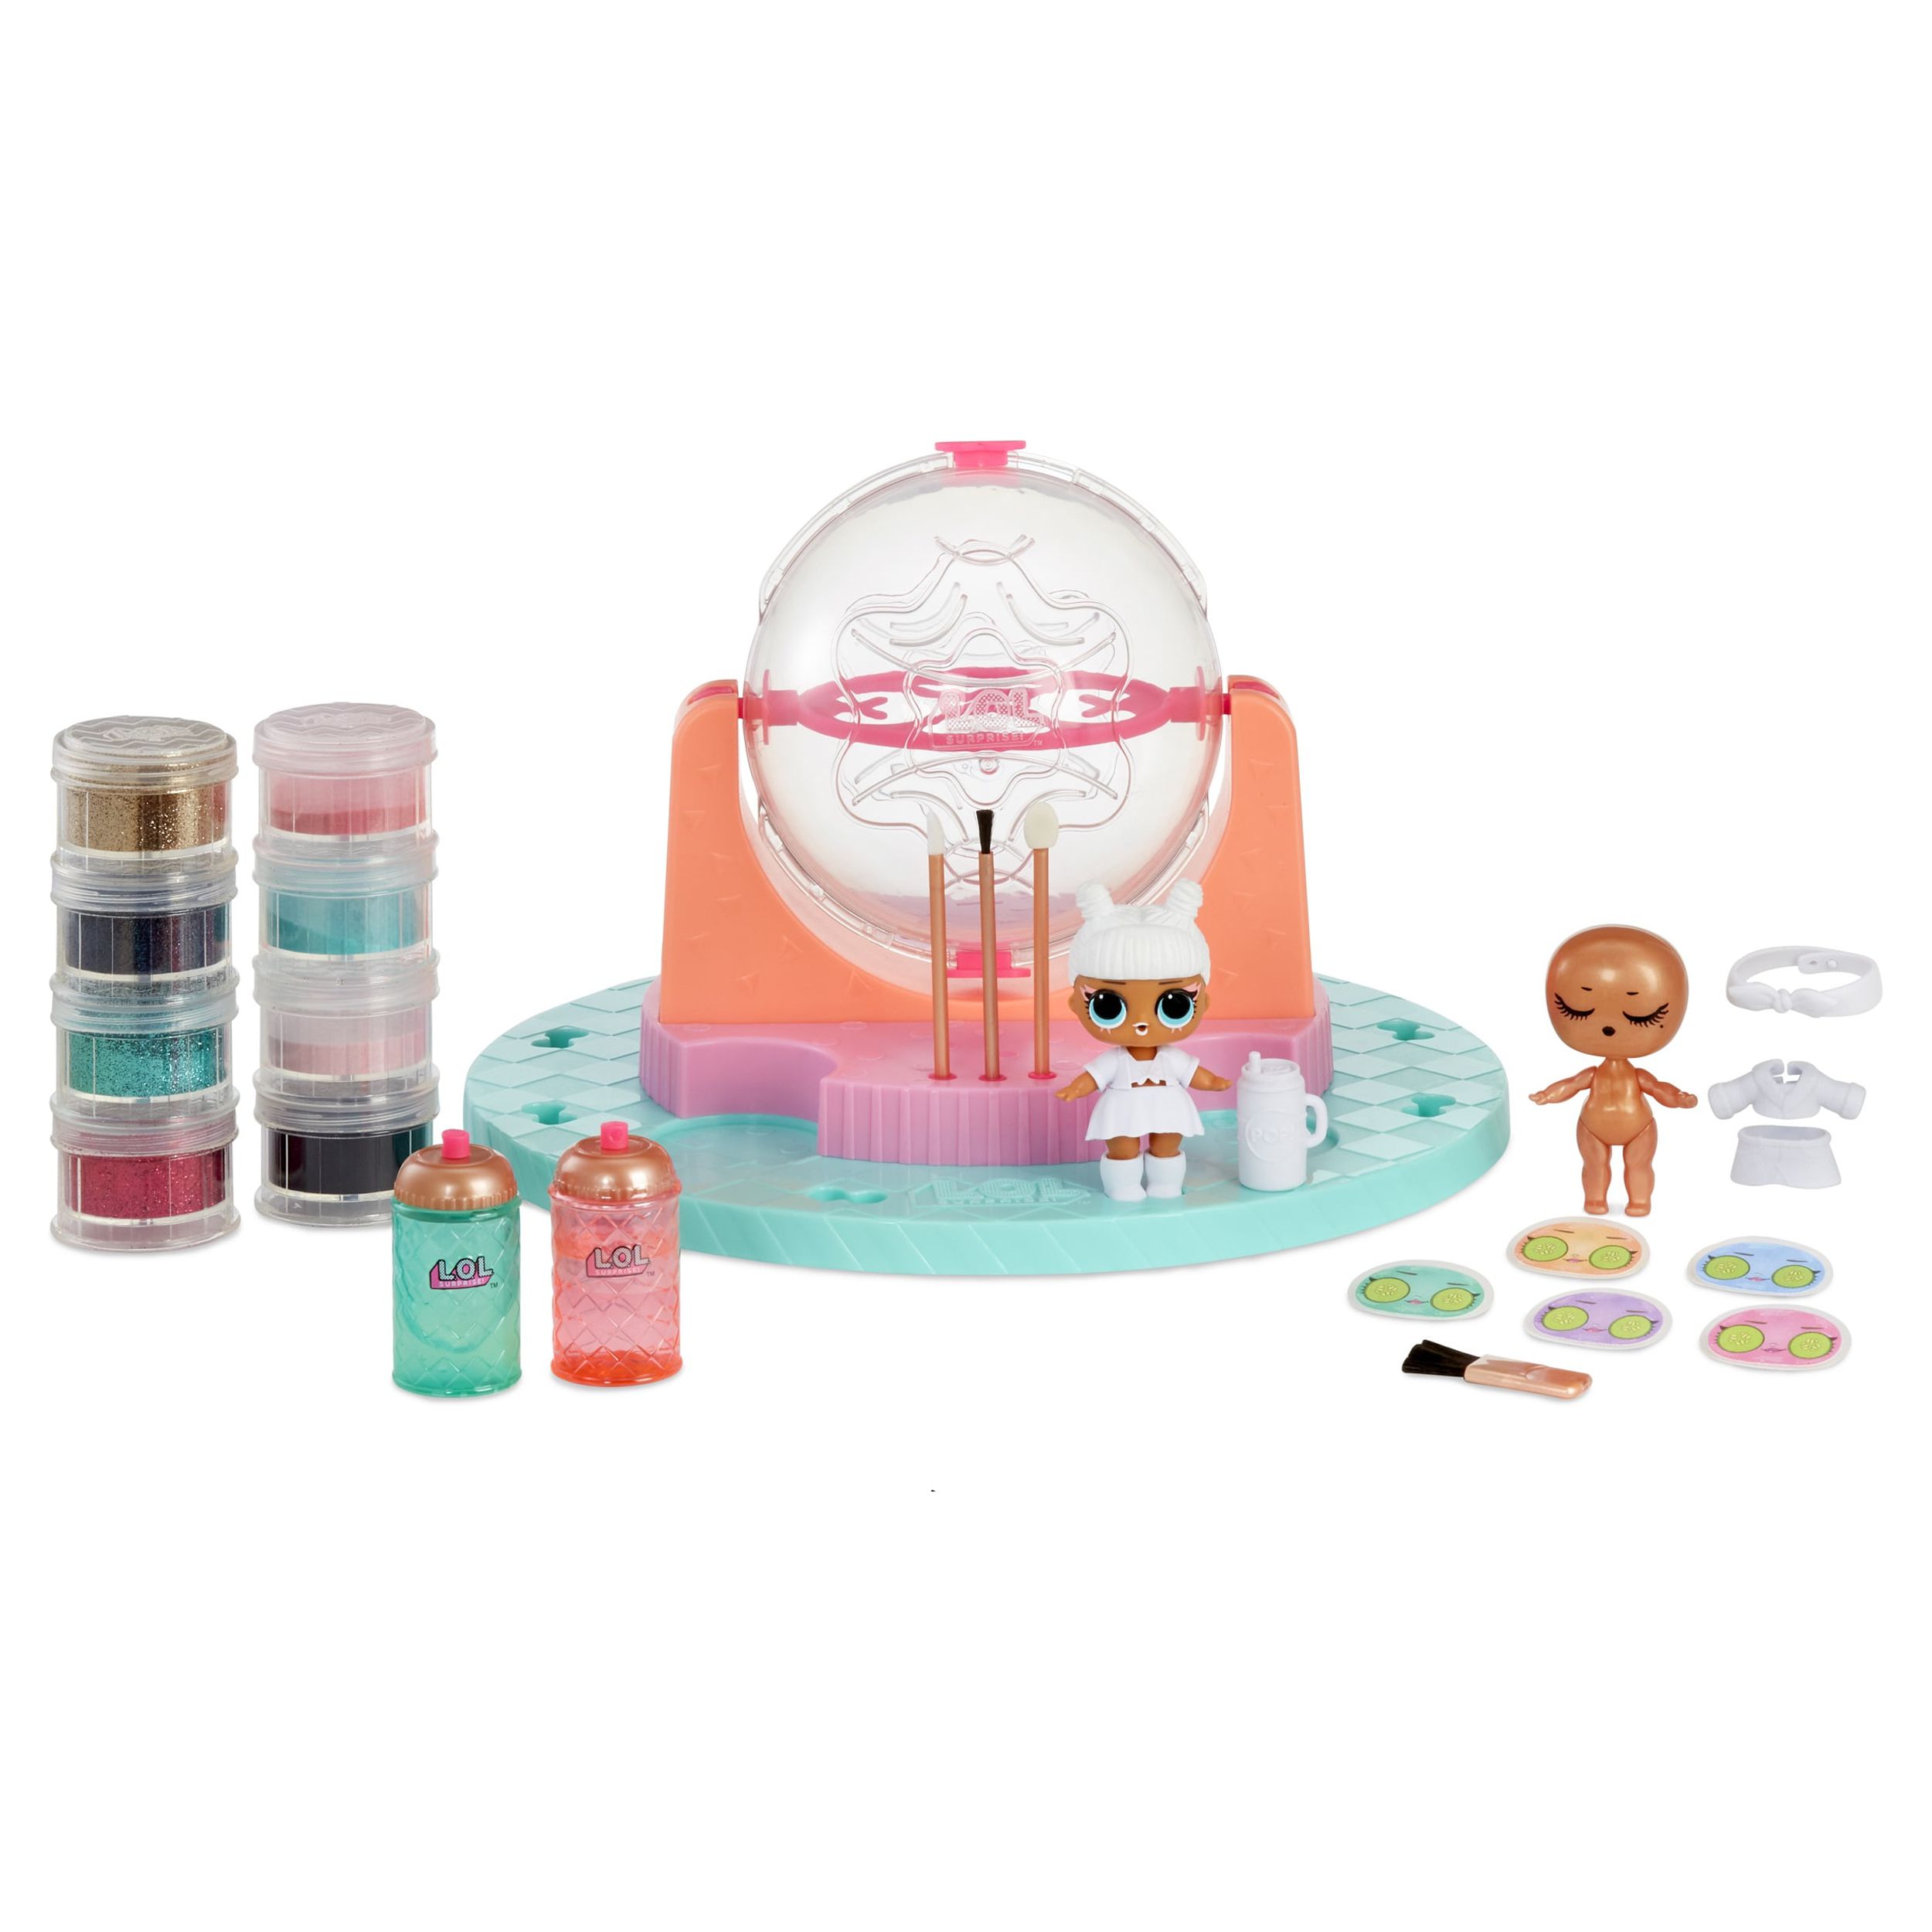 LOL Surprise DIY Glitter Factory Playset With Exclusive Doll, Great Gift for Kids Ages 4 5 6+ - image 1 of 2